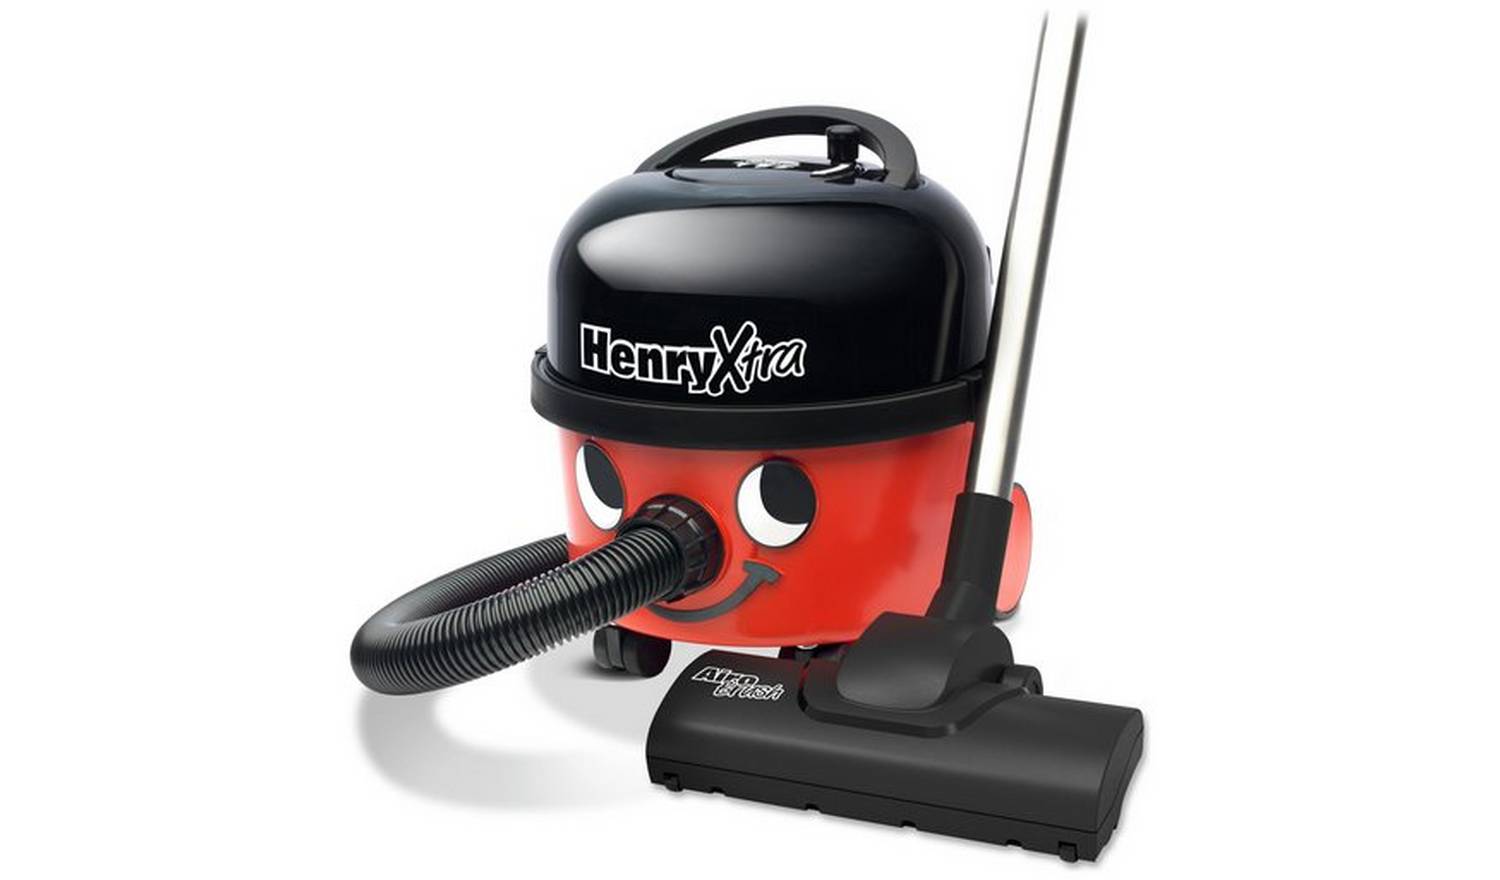 Henry Xtra Bagged Cylinder Vacuum Cleaner